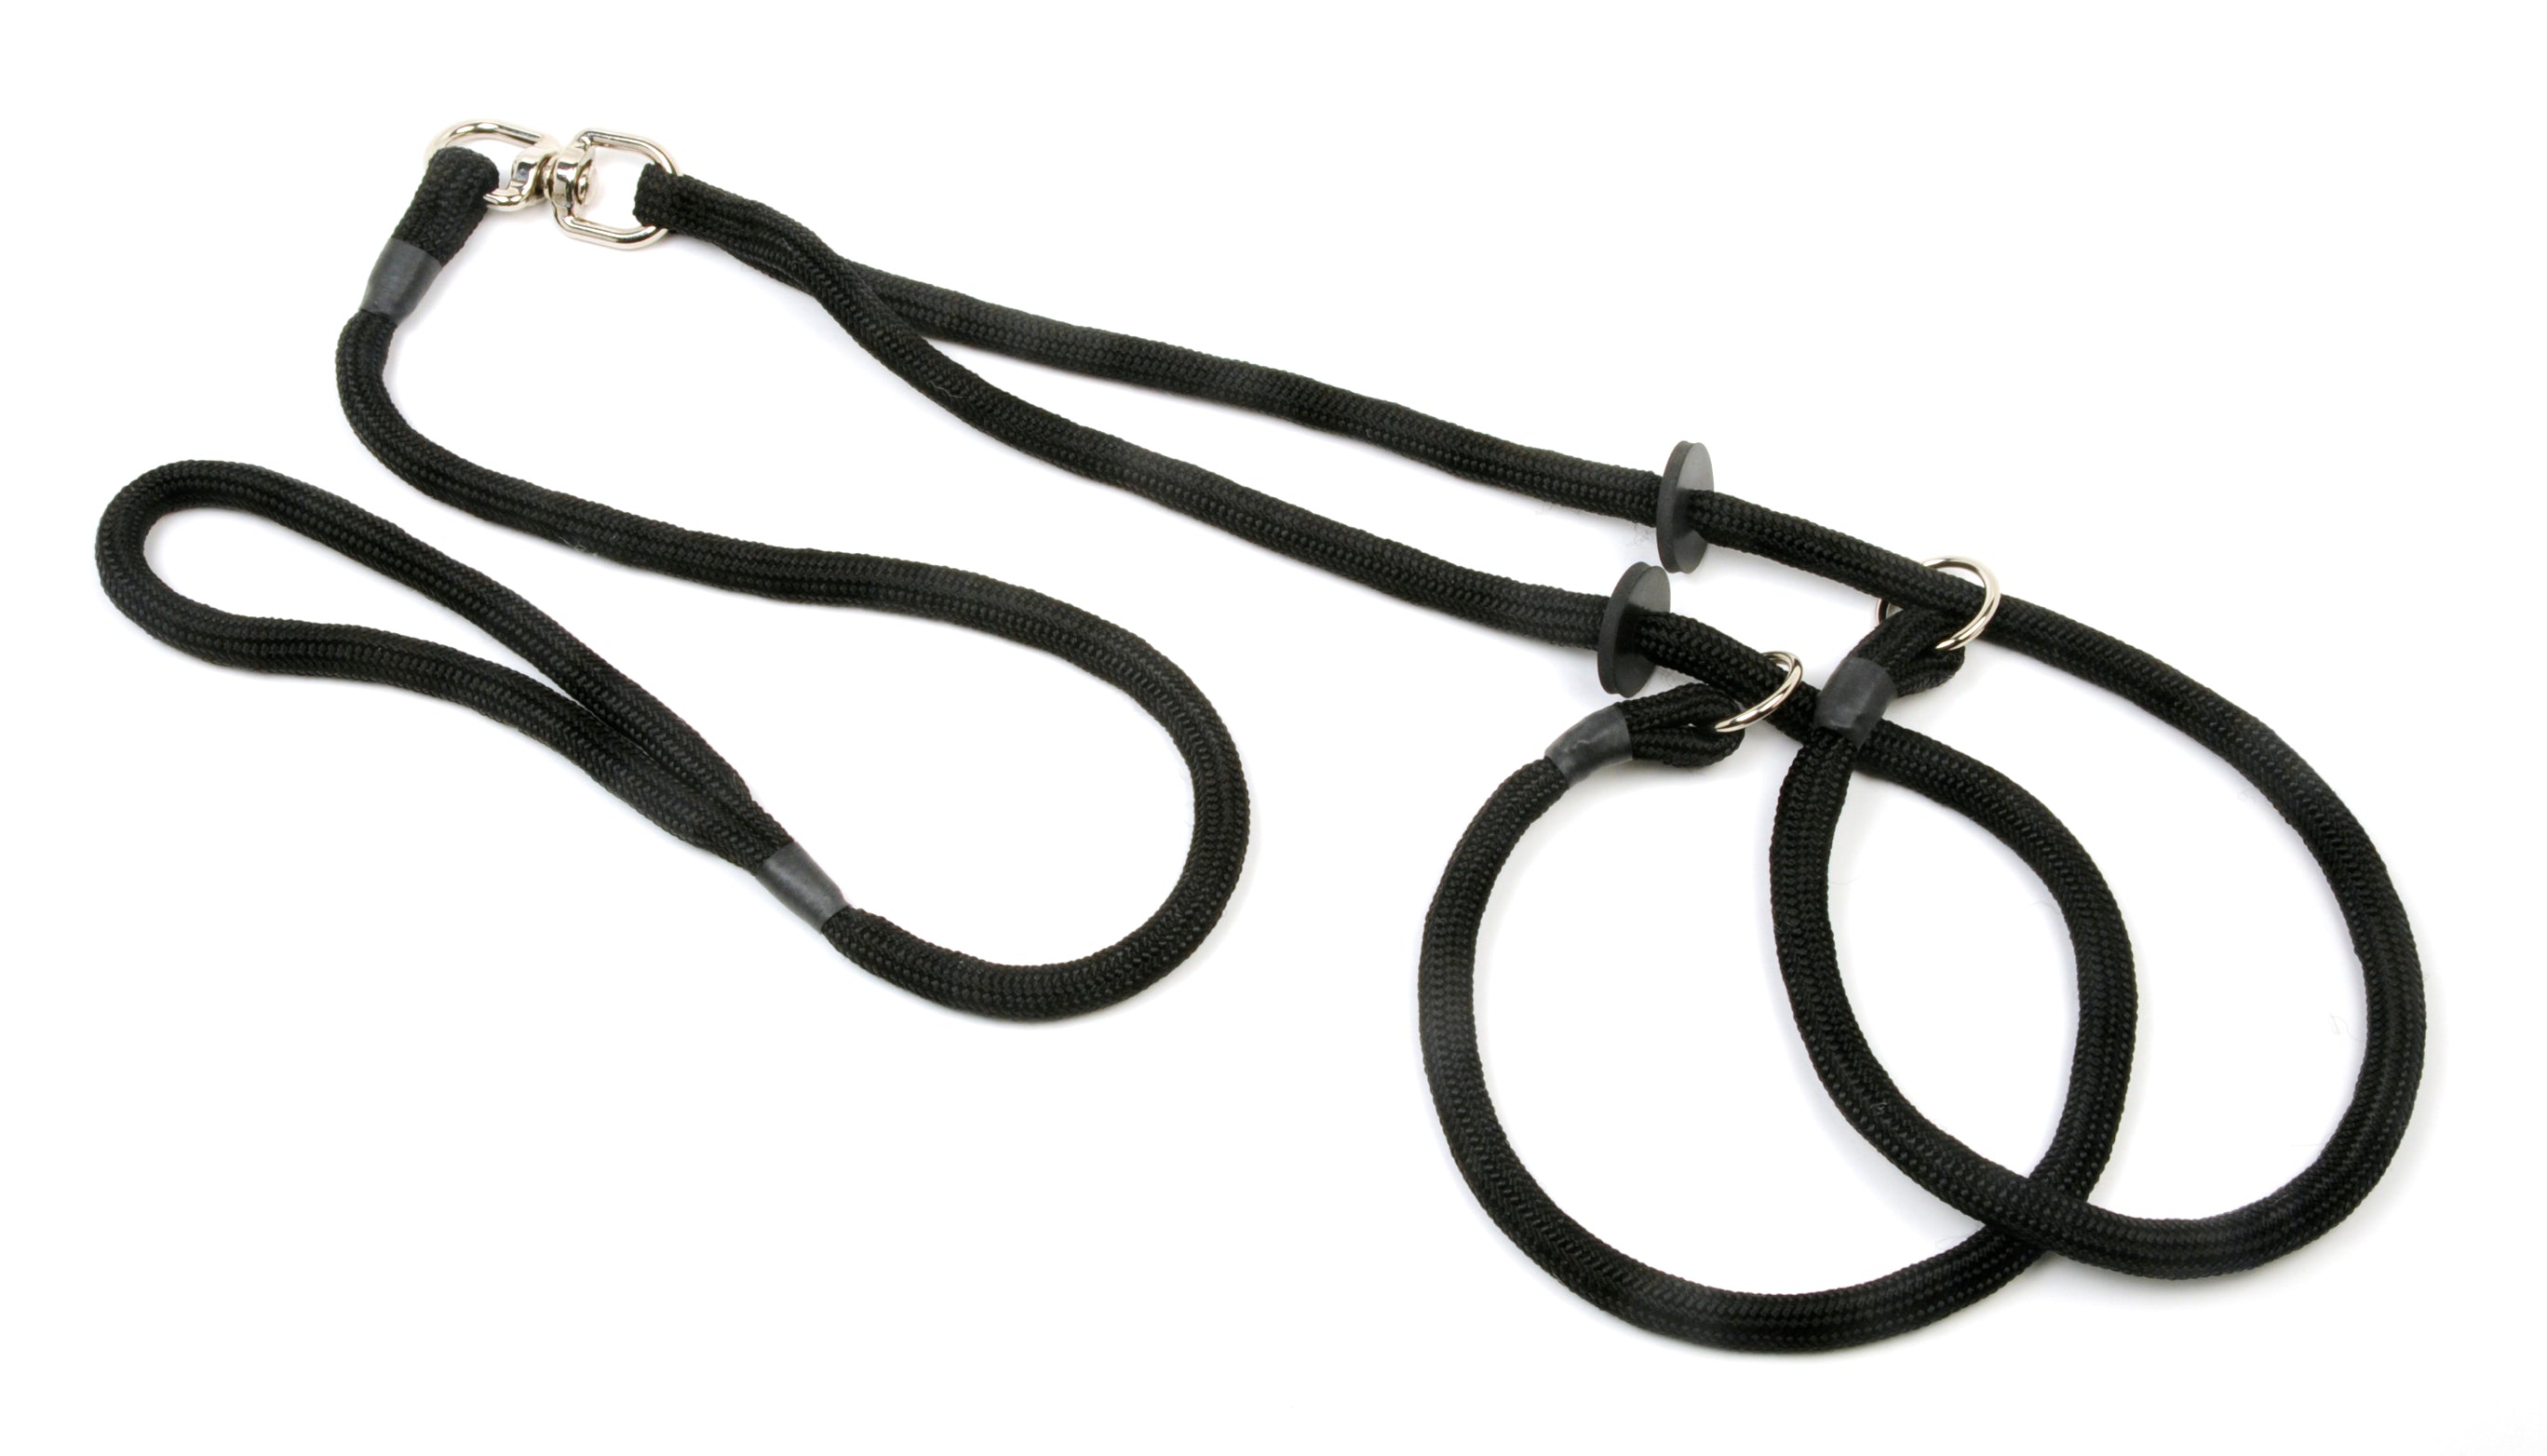 8mm Diameter x 1.5M Braid Brace Slip Lead with Swivel - With Rubber Stops - 8mm Diameter x 1.5M Braid Brace Slip Lead with Swivel - With Rubber Stops. Perfect for two dogs that like to spin. #ropedogleads #gundogleads #kjkropedogleads #dogtraining #bracedogleads 